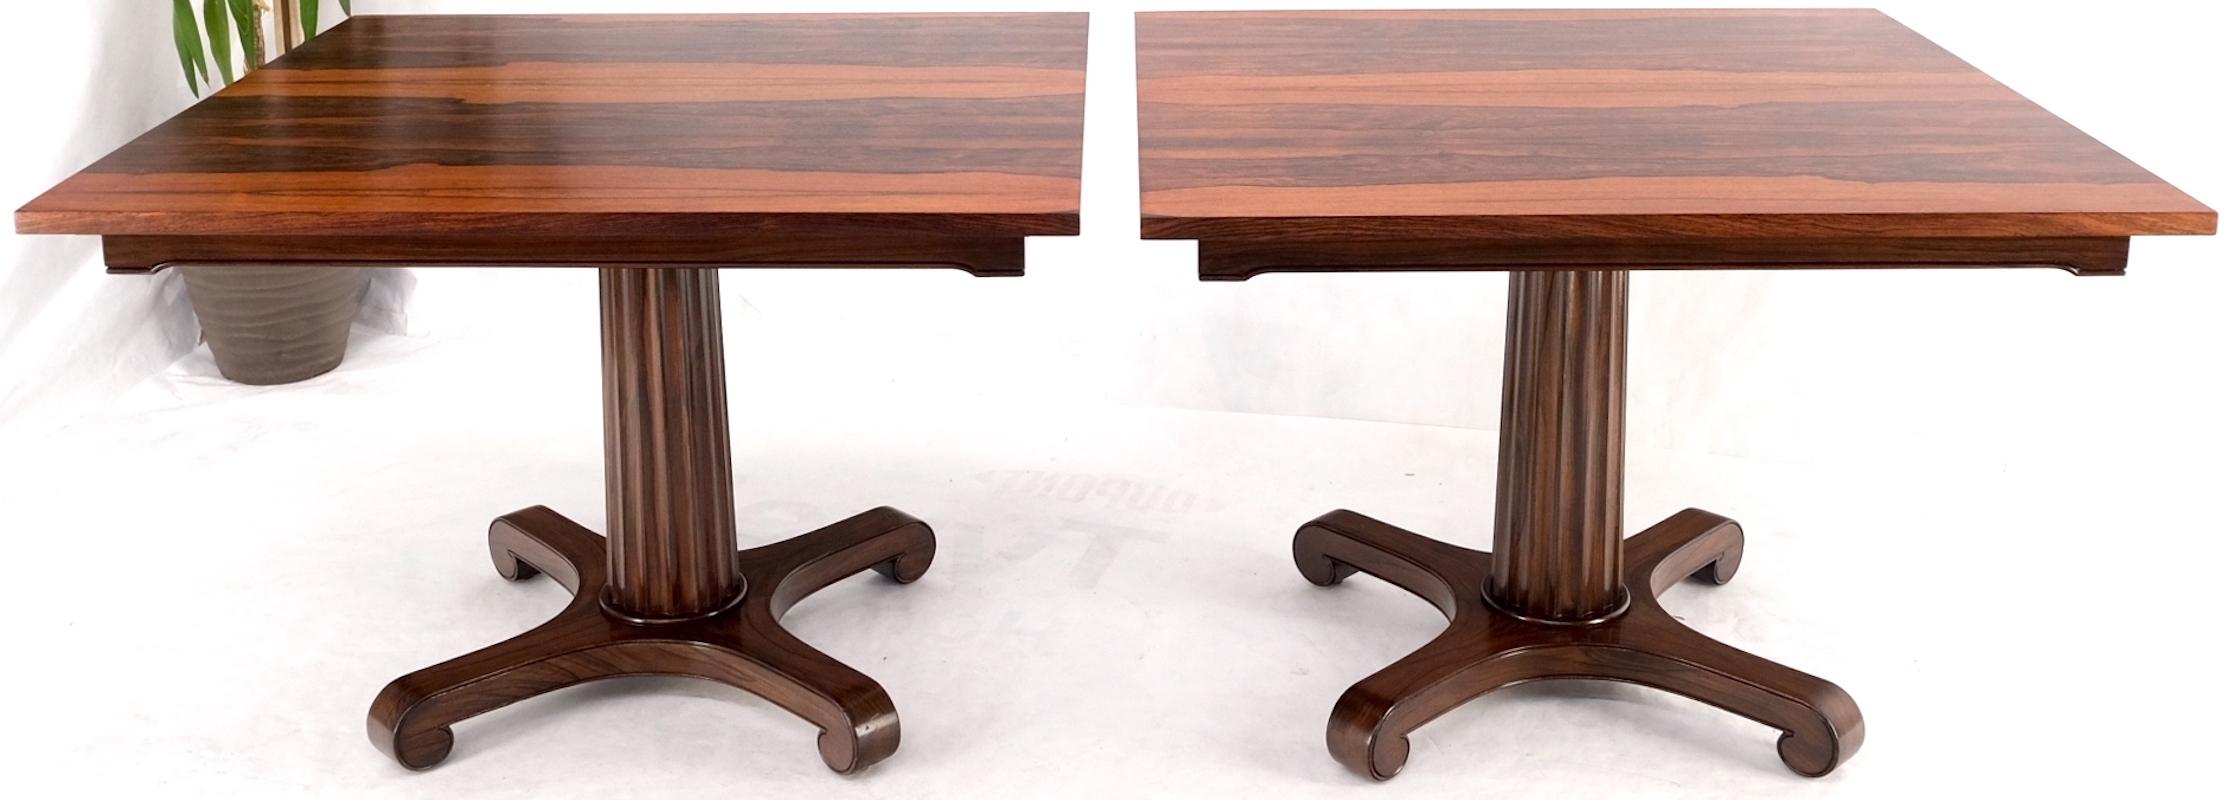 Neoclassical Two Part Rosewood Two Pedestals Dining Table Game Table Mint For Sale